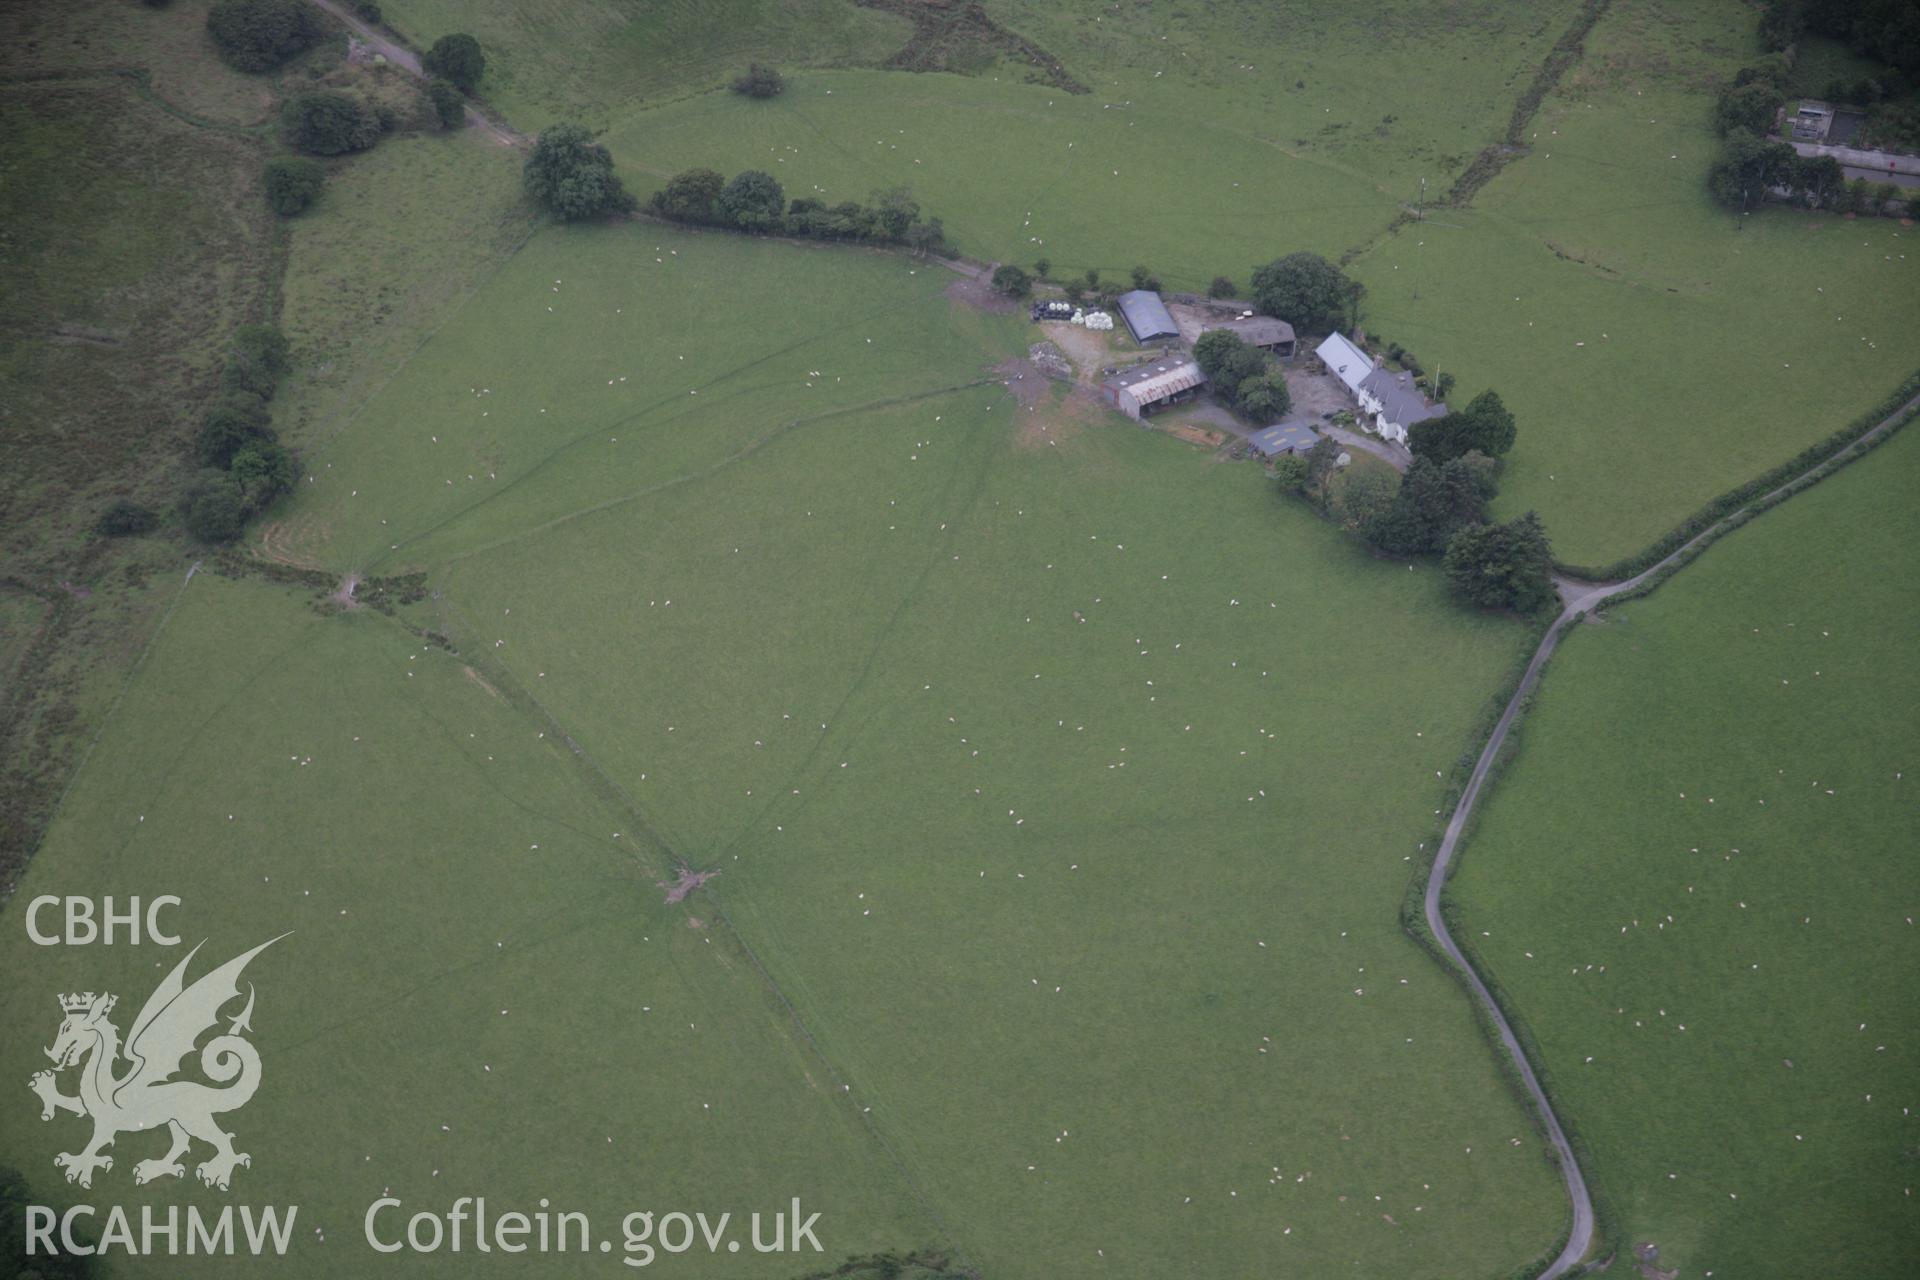 RCAHMW digital colour oblique photograph of Cefn Gaer Roman Fort. Taken on 18/07/2005 by T.G. Driver.